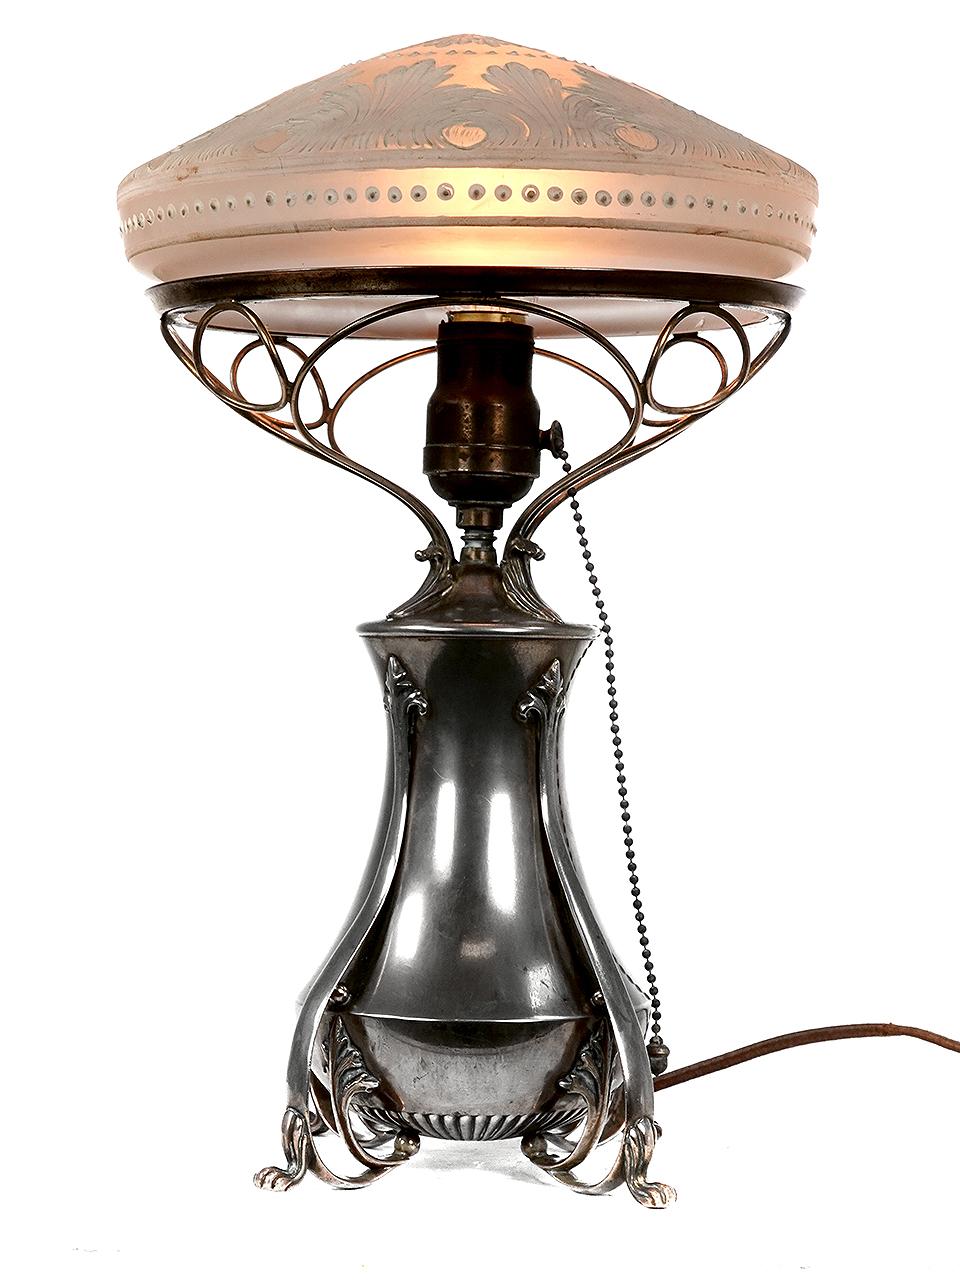 The base on this Art Nouveau lamp is silver plated with delicate scroll work. The glass shade is a unique floral pattern in a carved cameo style. The look is very rich.